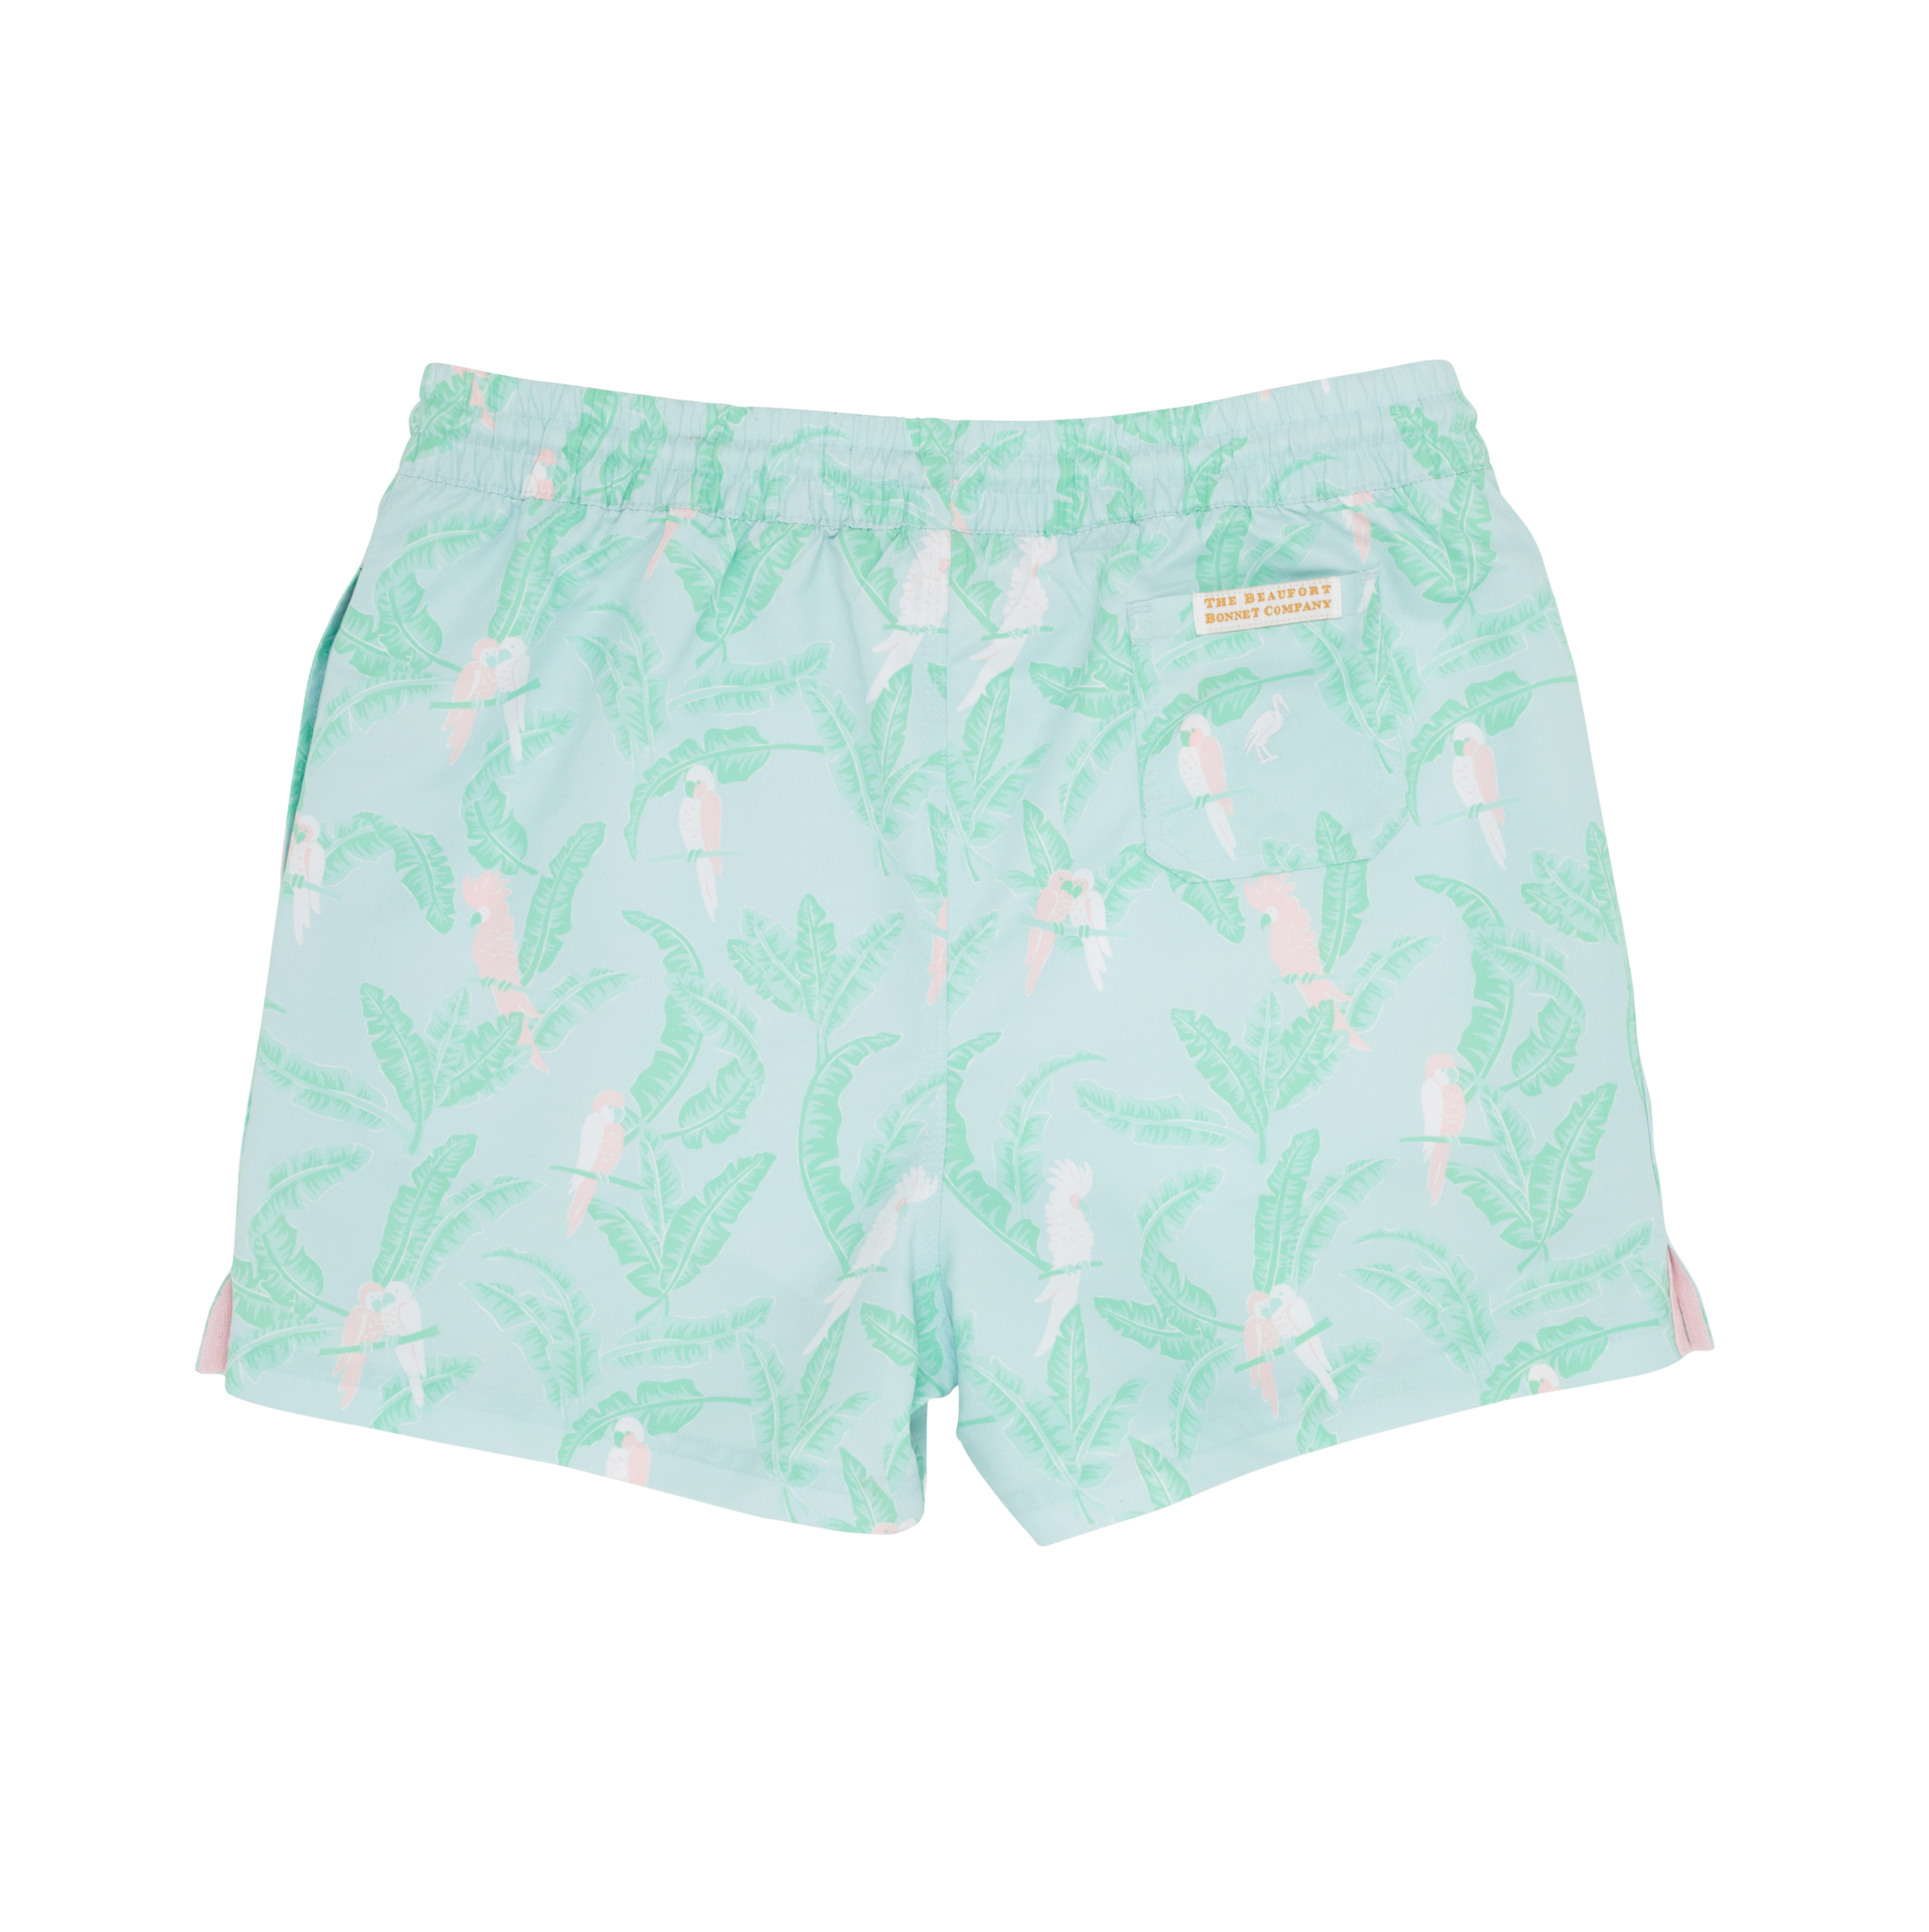 The Beaufort Bonnet Company - Toddy Swim Trunks - Parrot Island Palms/Worth Ave White